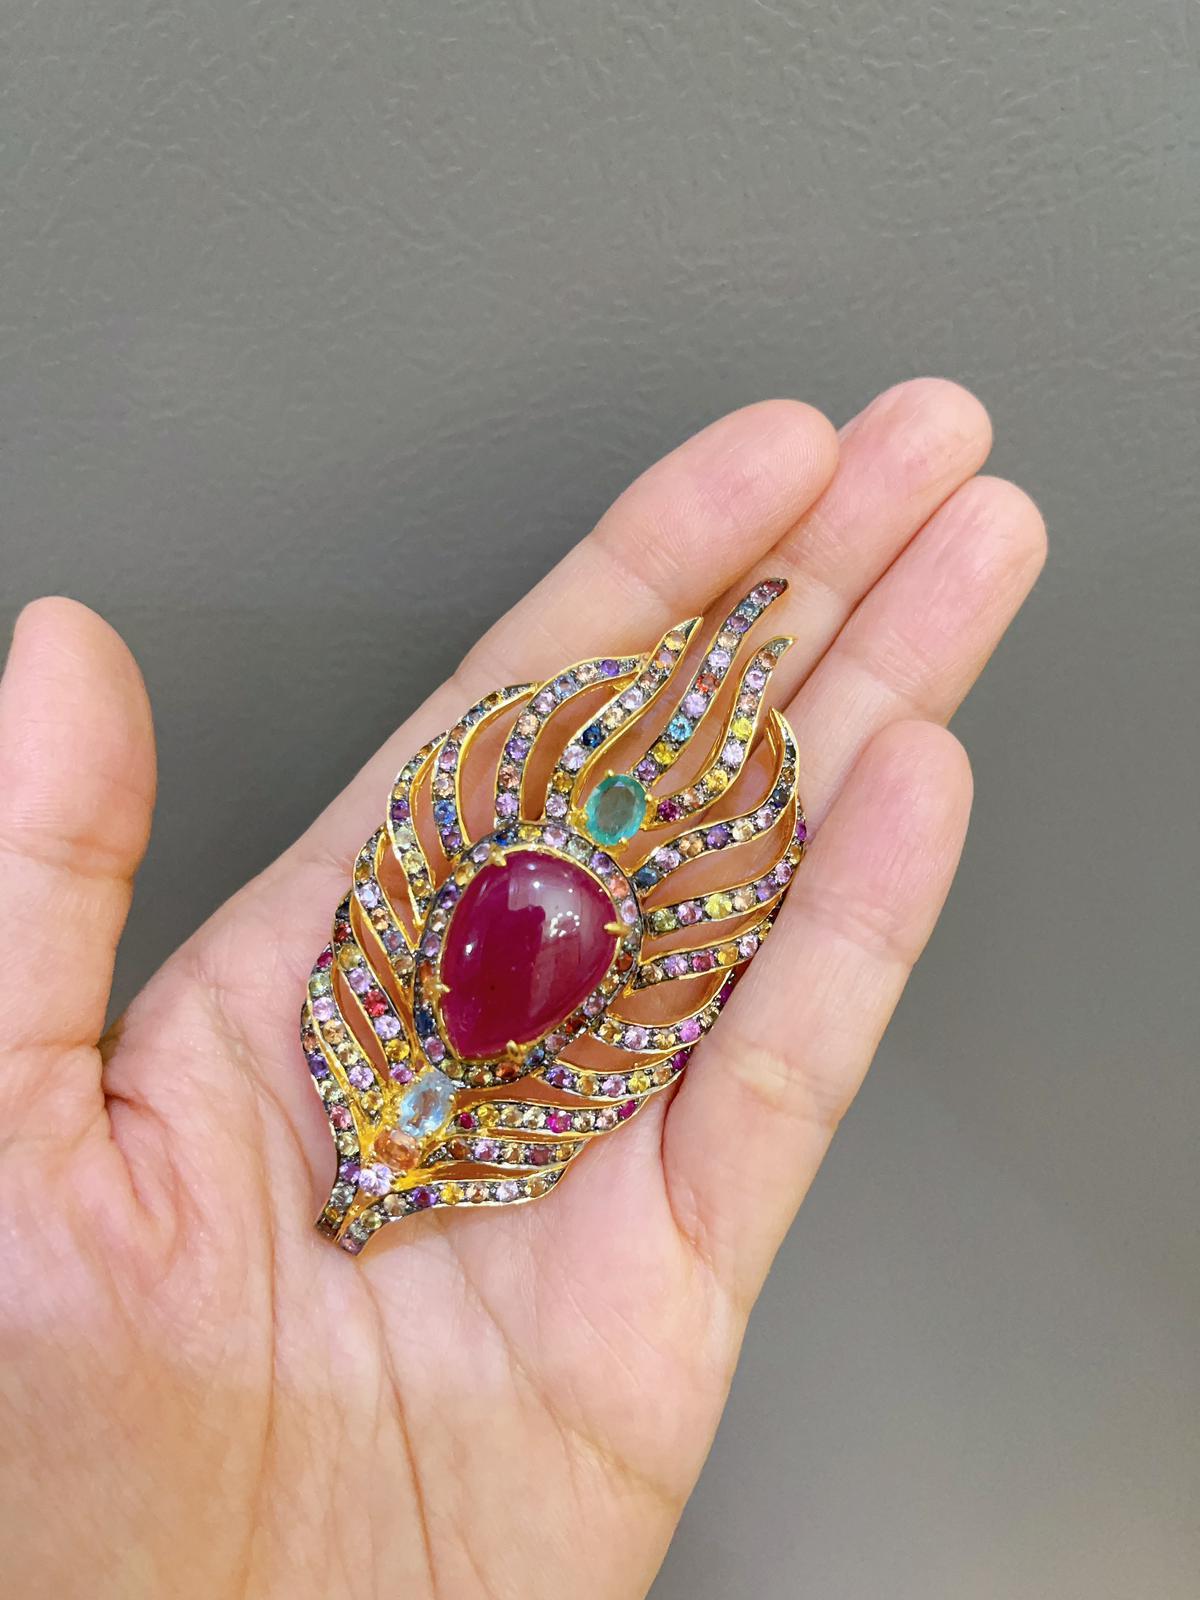 Baroque Bochic “Orient” Brooch, Natural Ruby, Sapphire & Emerald Set in 22 Gold & Silver